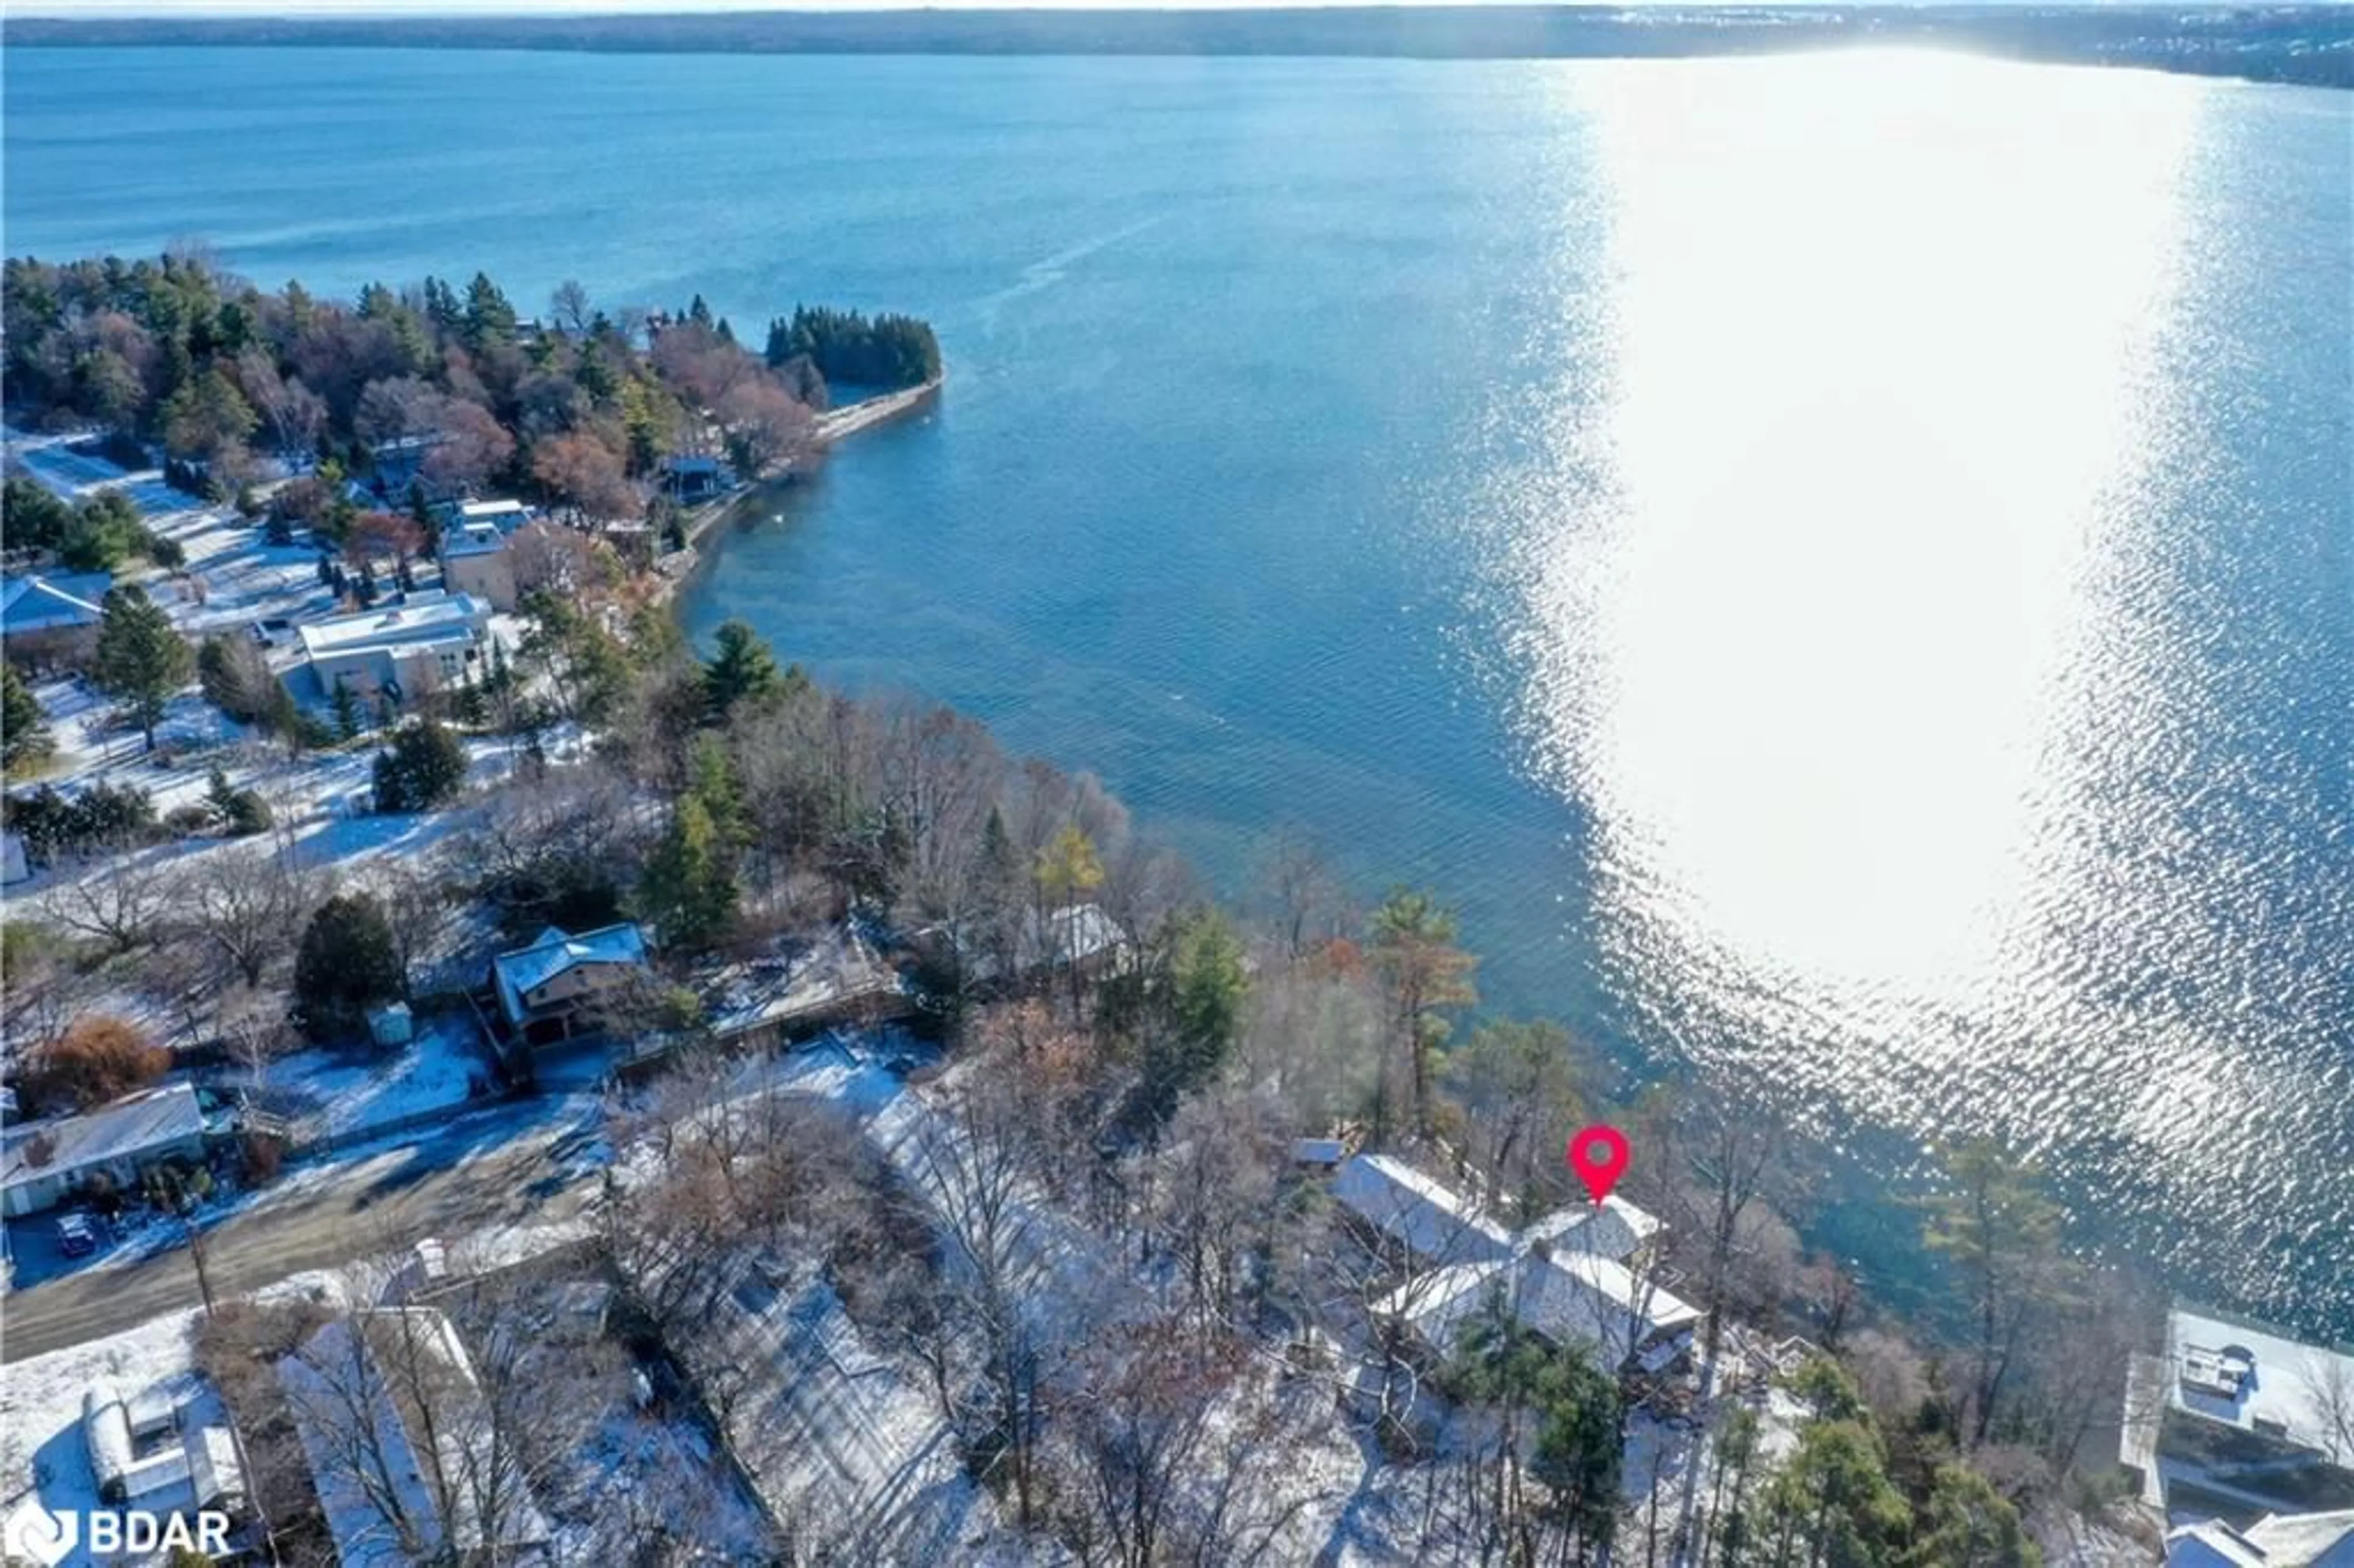 Lakeview for 2A Penetanguishene Rd, Barrie Ontario L4M 4R9